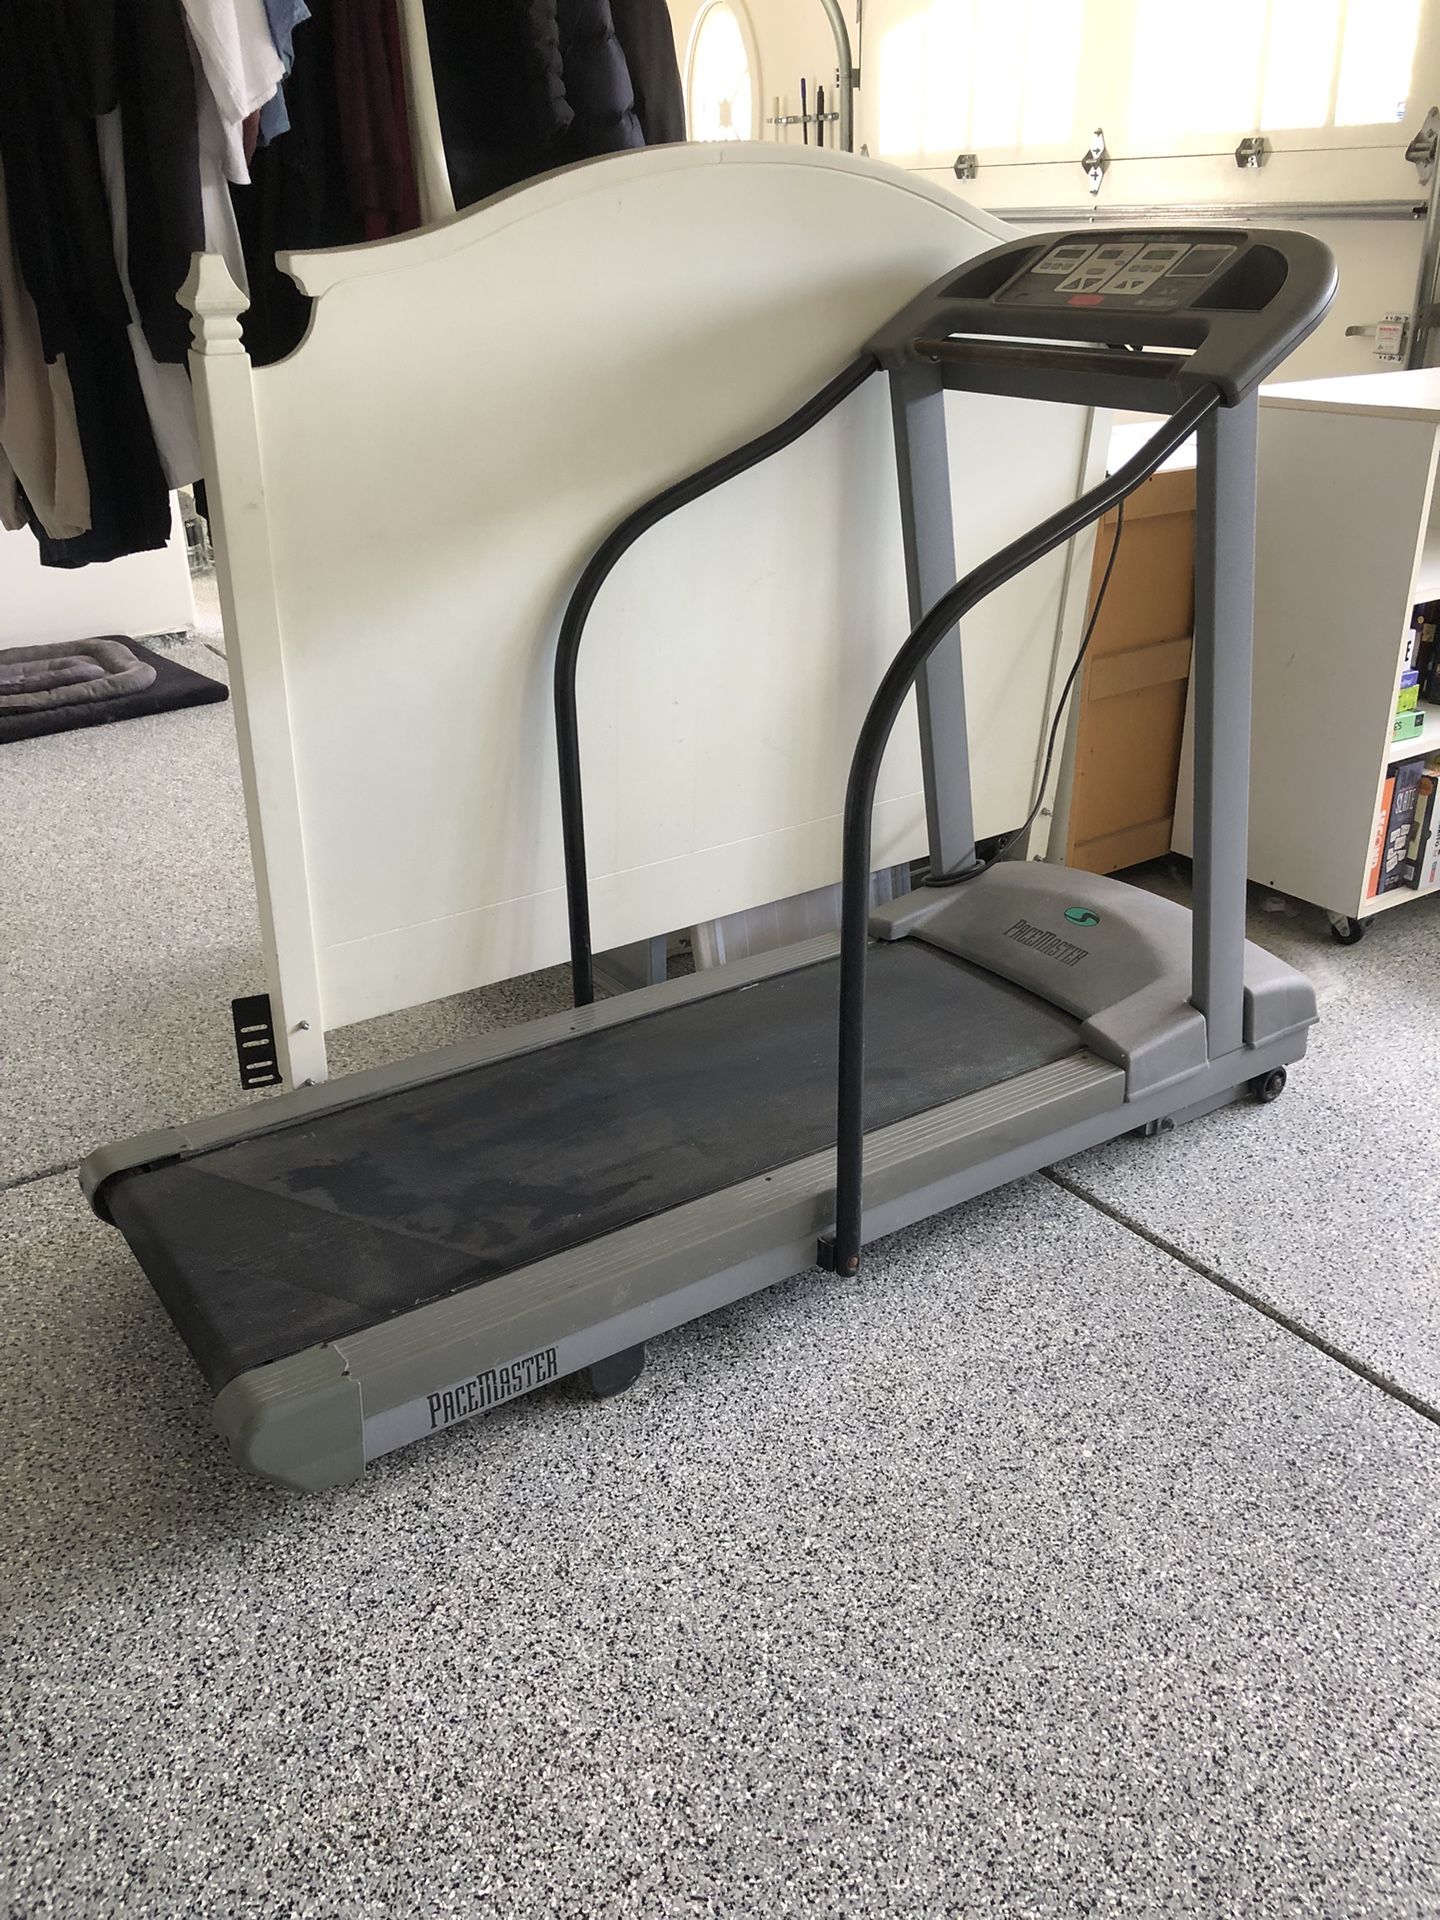 PaceMaster Treadmill